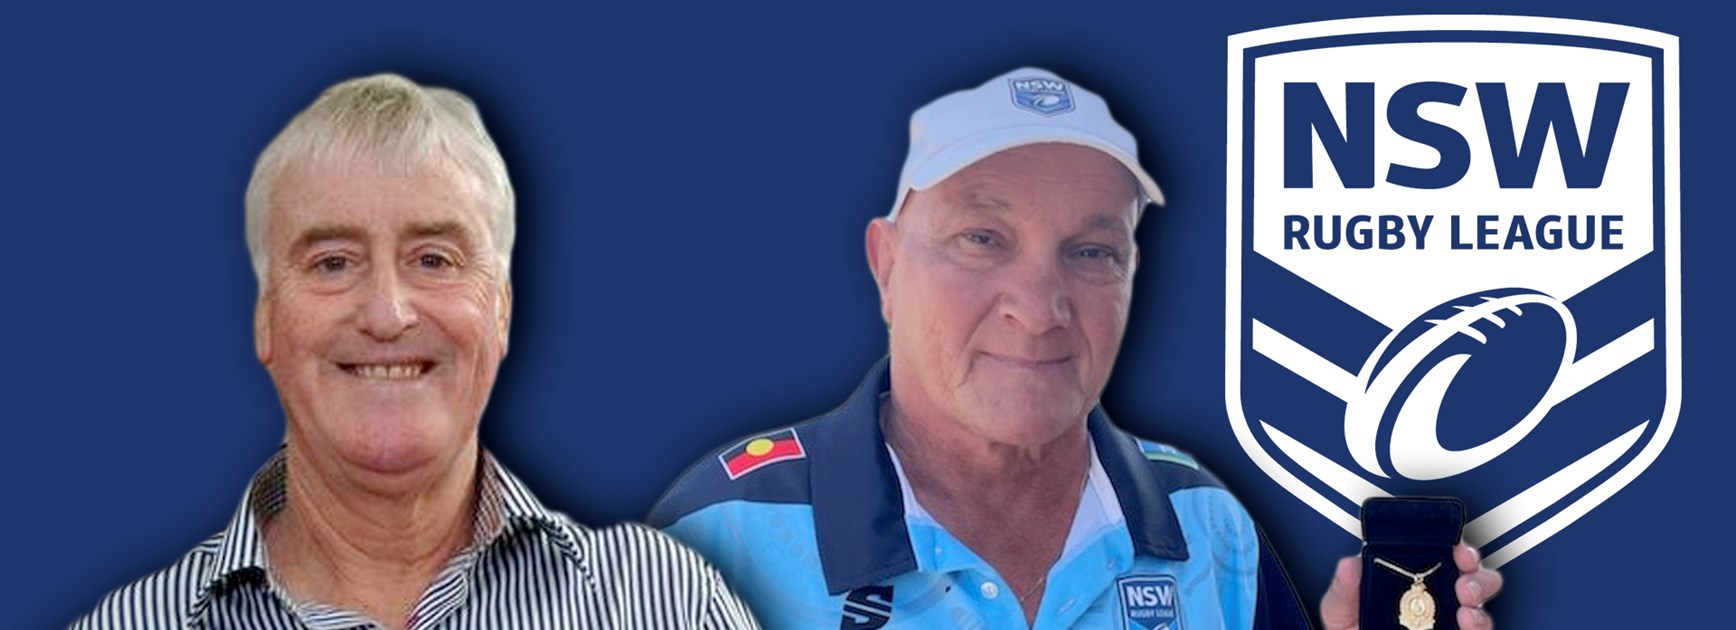 Life Members bring 100 years in Rugby League experience